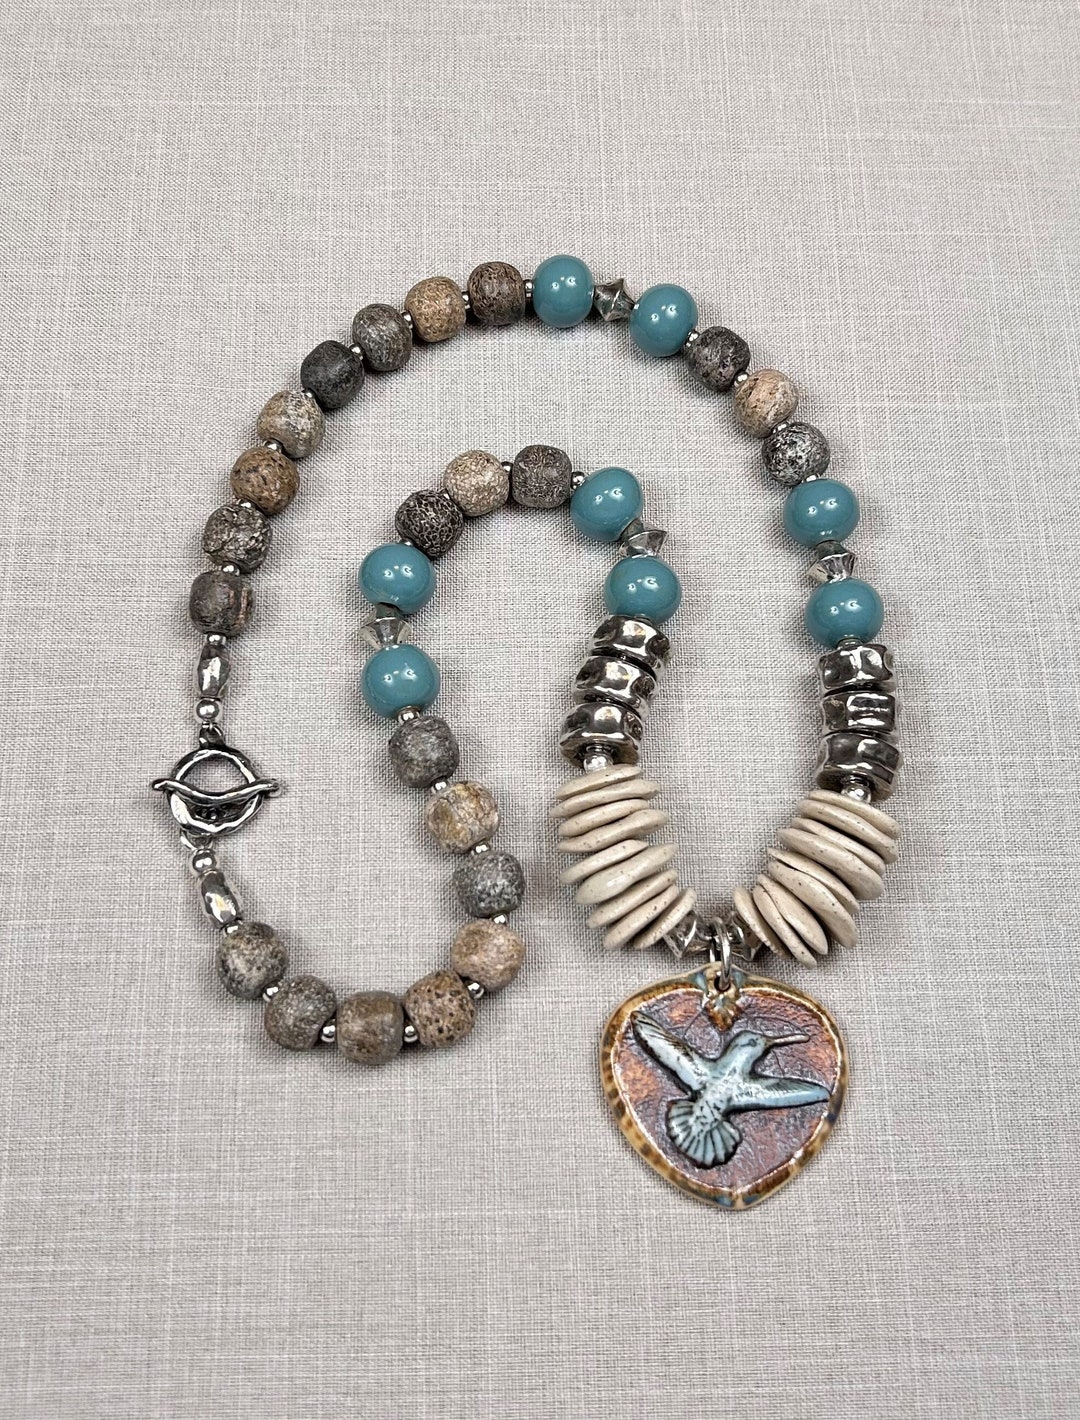 HUMMINGBIRD, Handmade Necklace Ceramic, Natural Stone, and Sterling ...